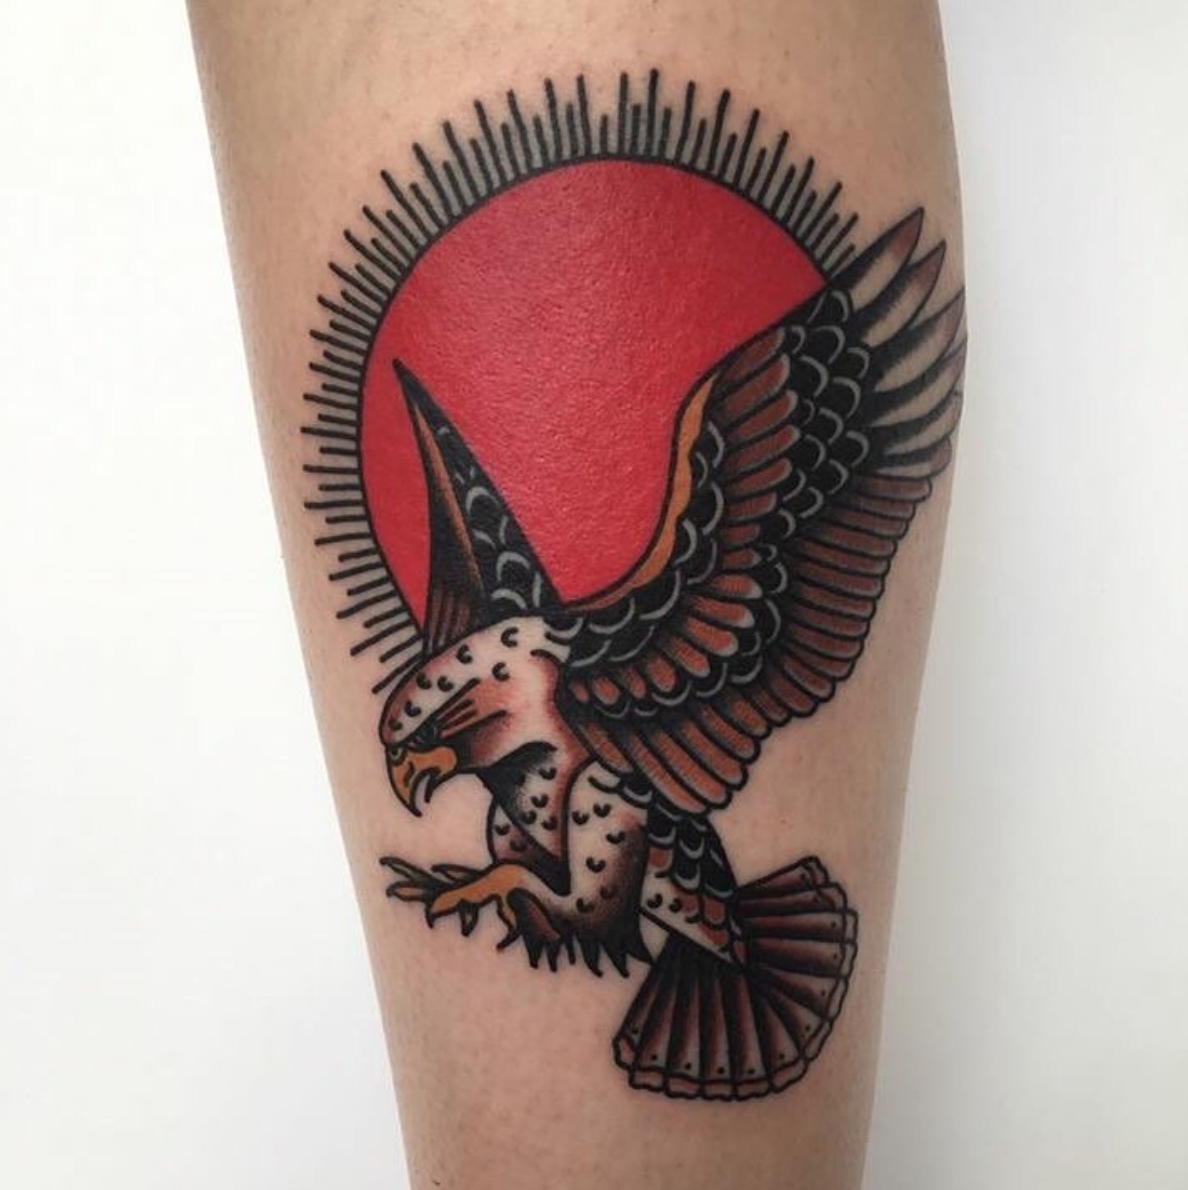 arm with bald eagle tattoo, facebook photo, tattoo, ink | Stable Diffusion